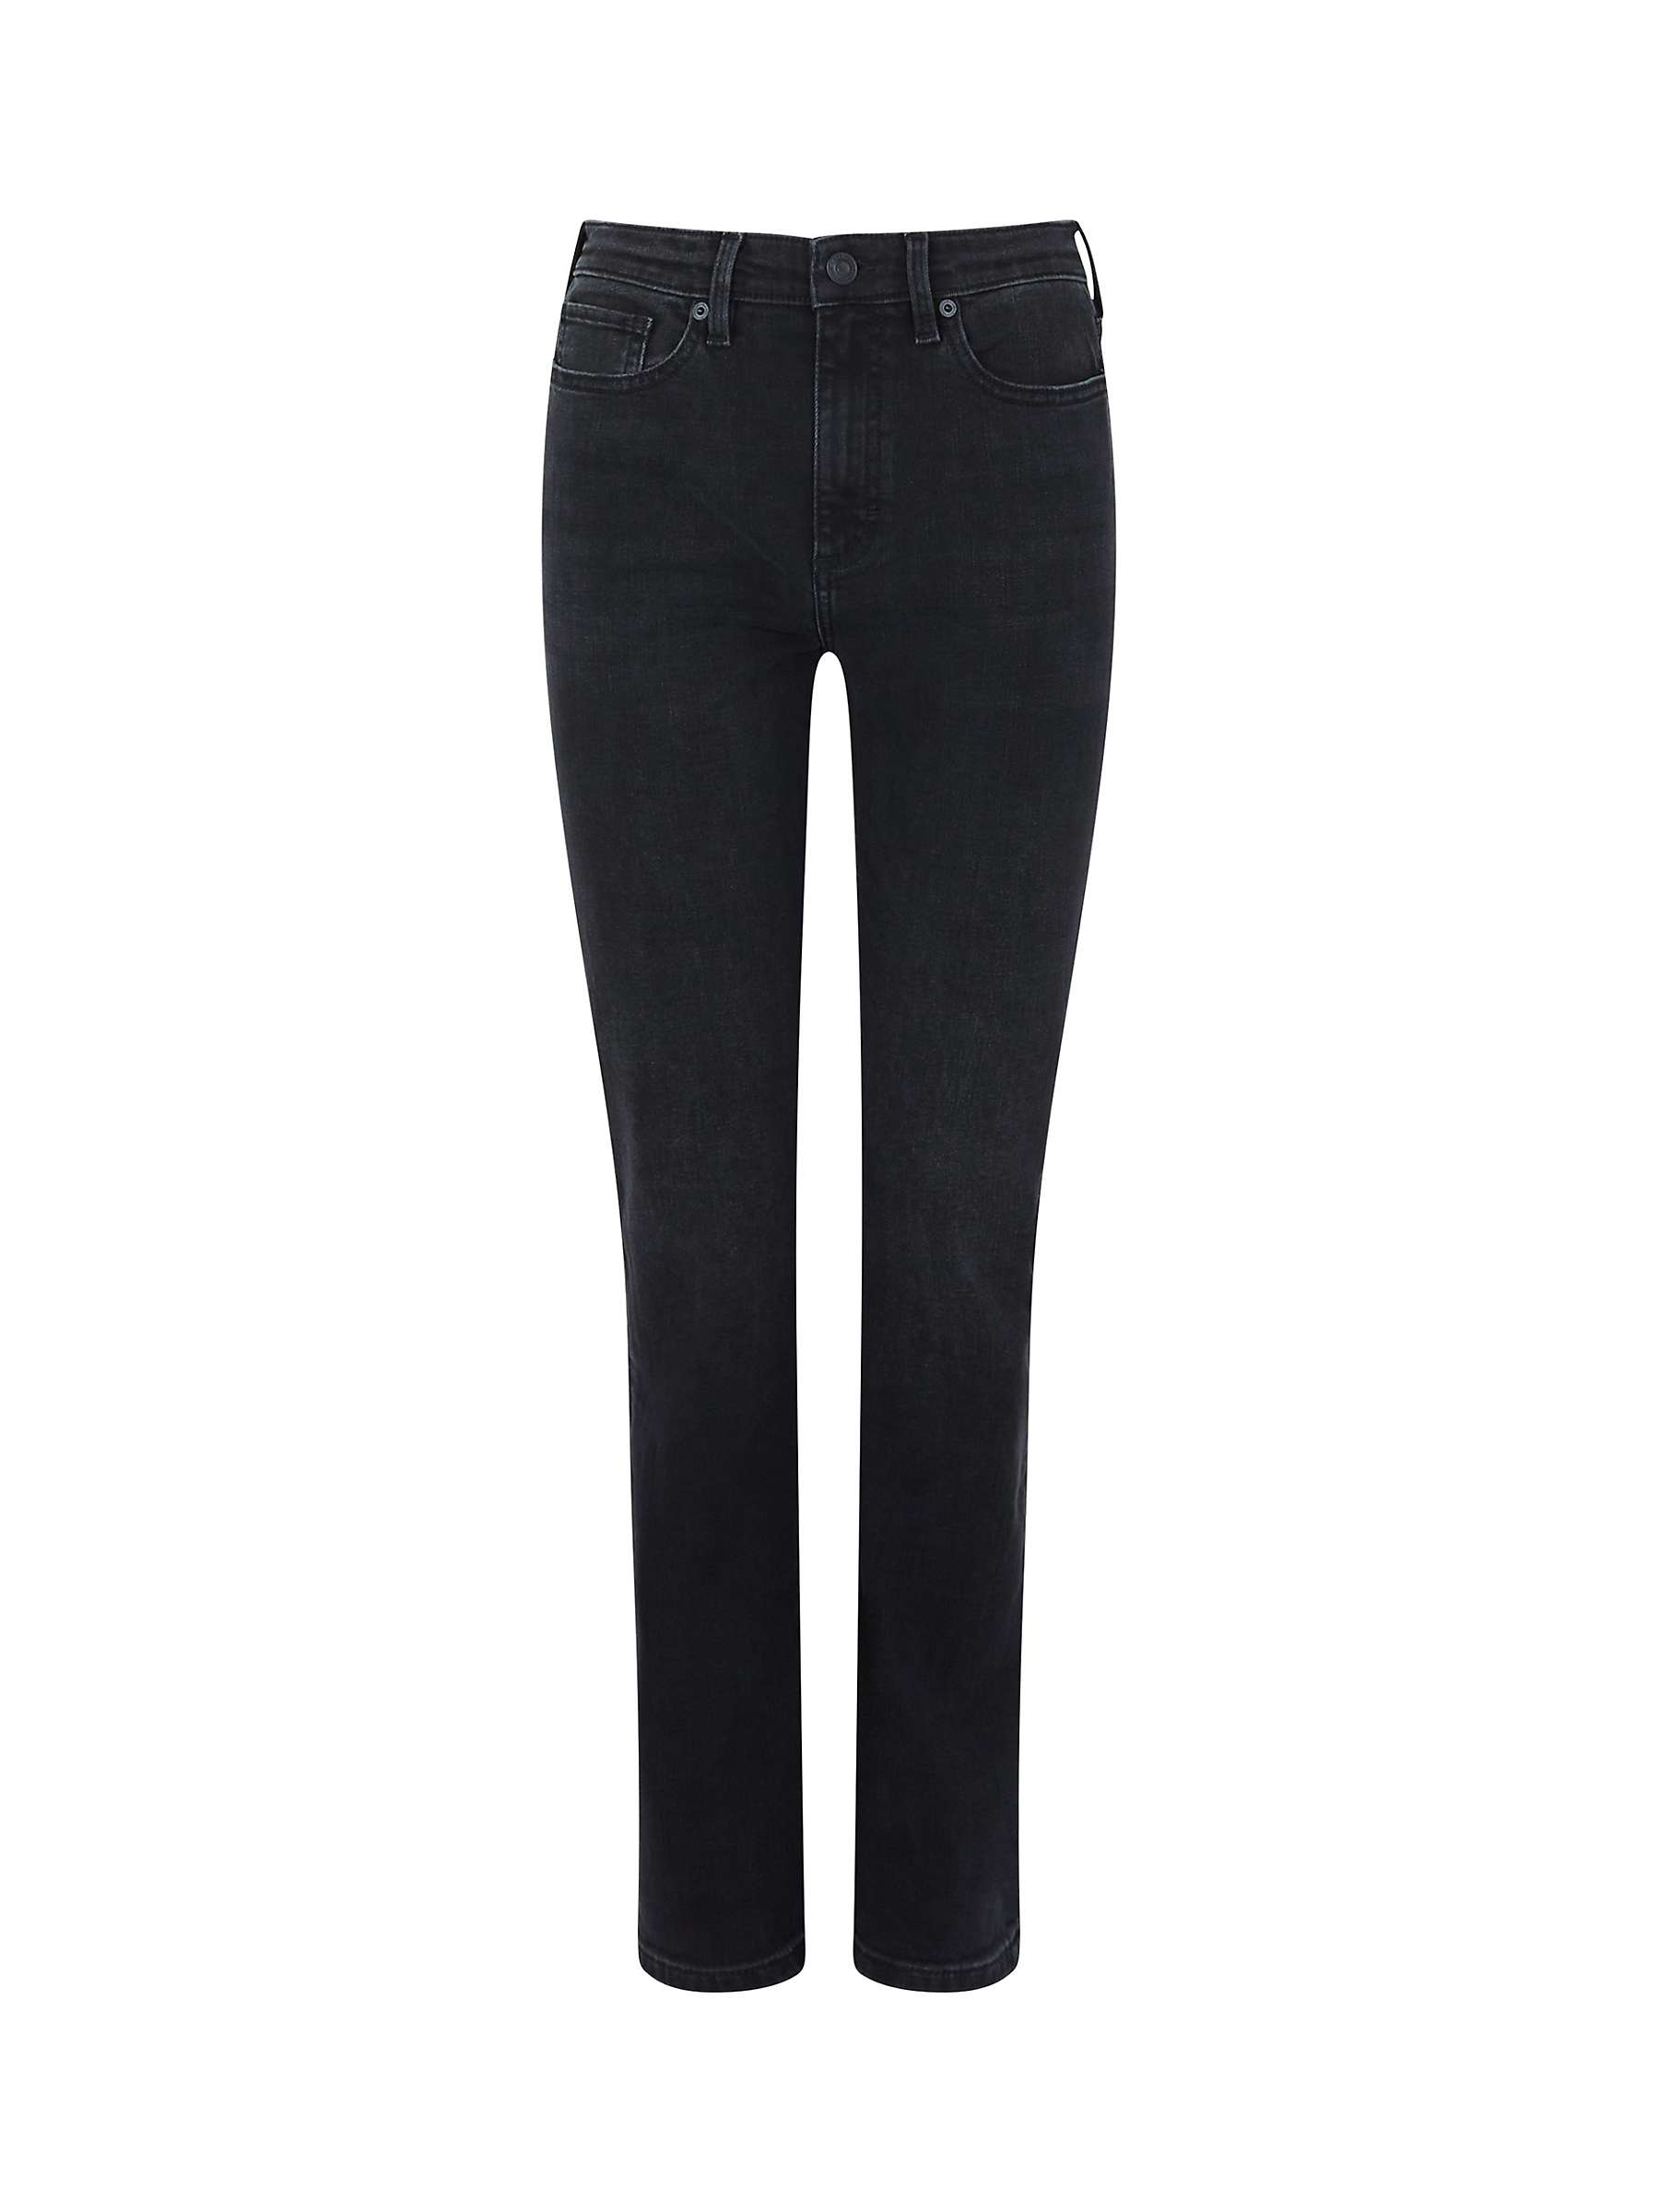 Buy French Connection Stretch Slim Jeans Online at johnlewis.com